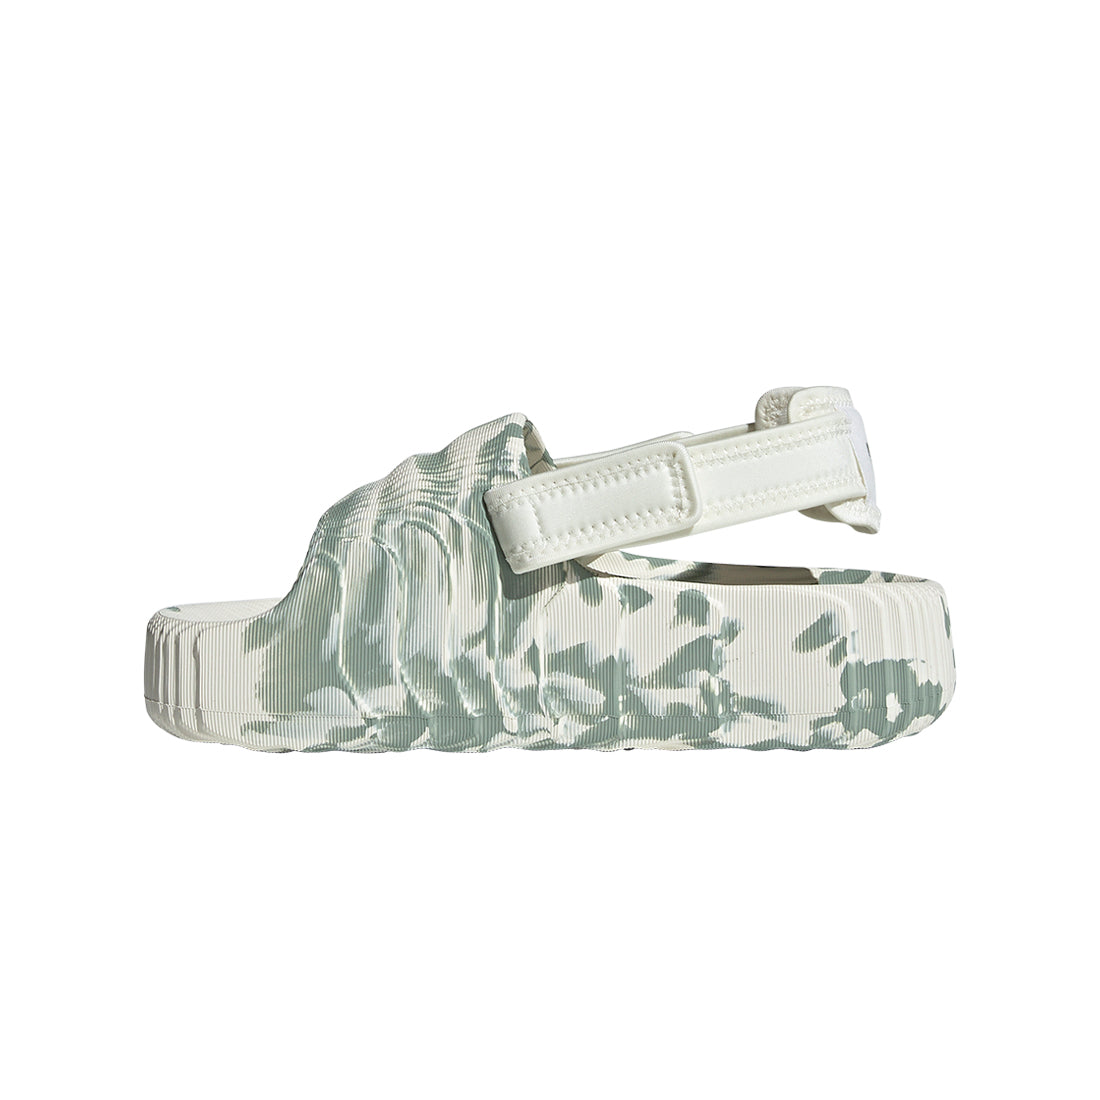 Adilette 22 Xlg W - Off White/Silver Green/Off White